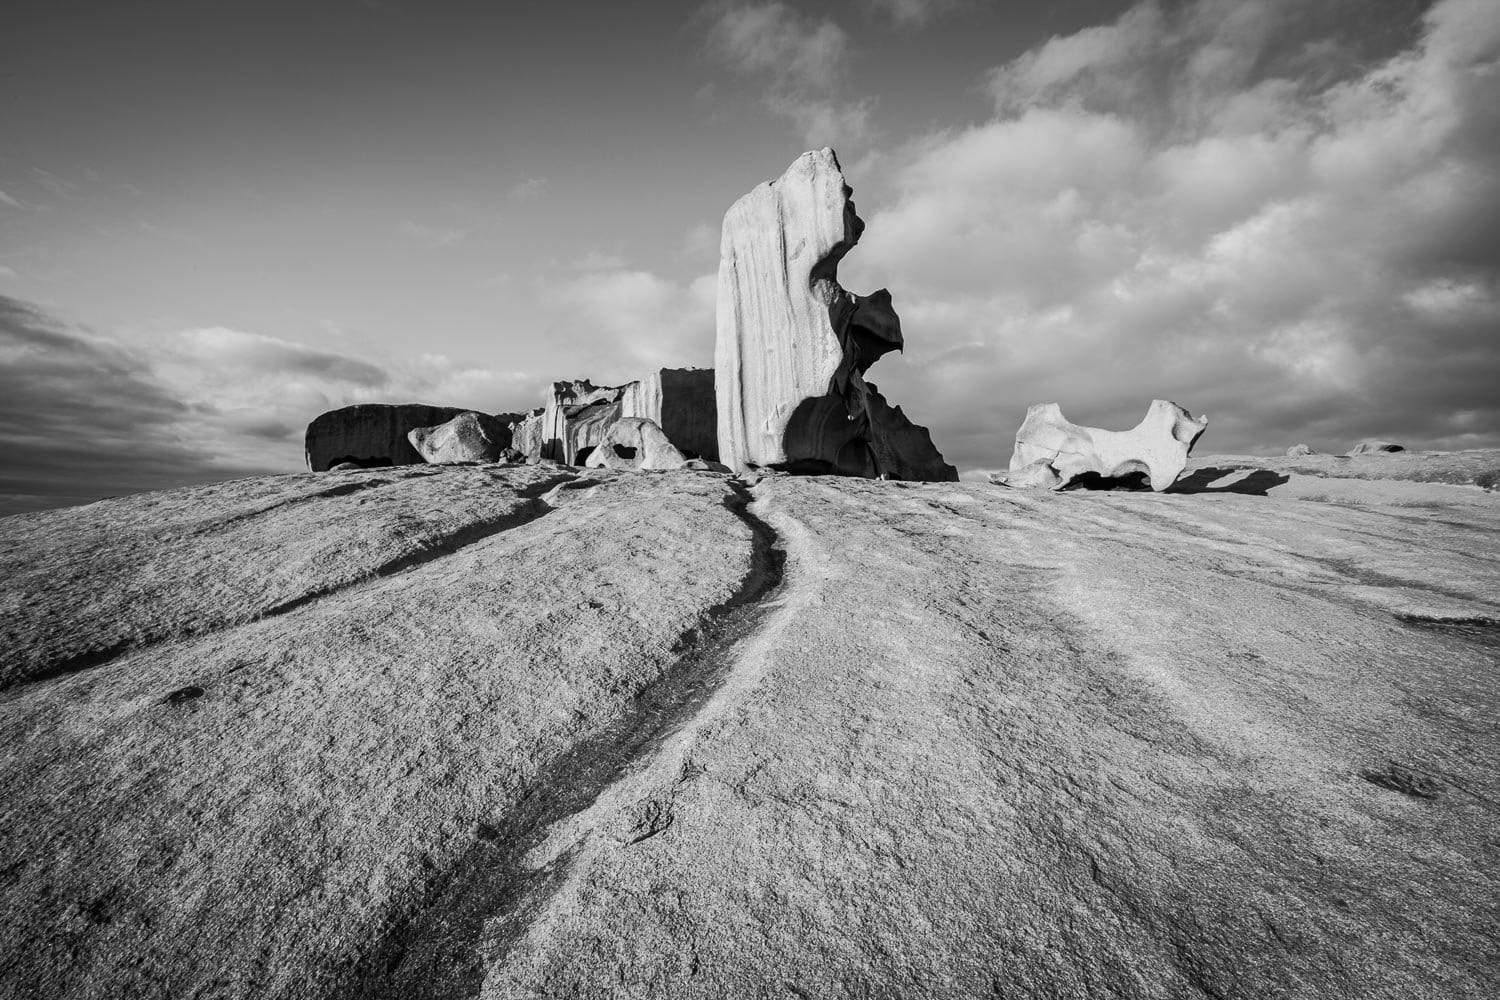 A black and white view of land with some standing sculpture of rocks, Remarkable Rocks #21 - Kangaroo Island SA